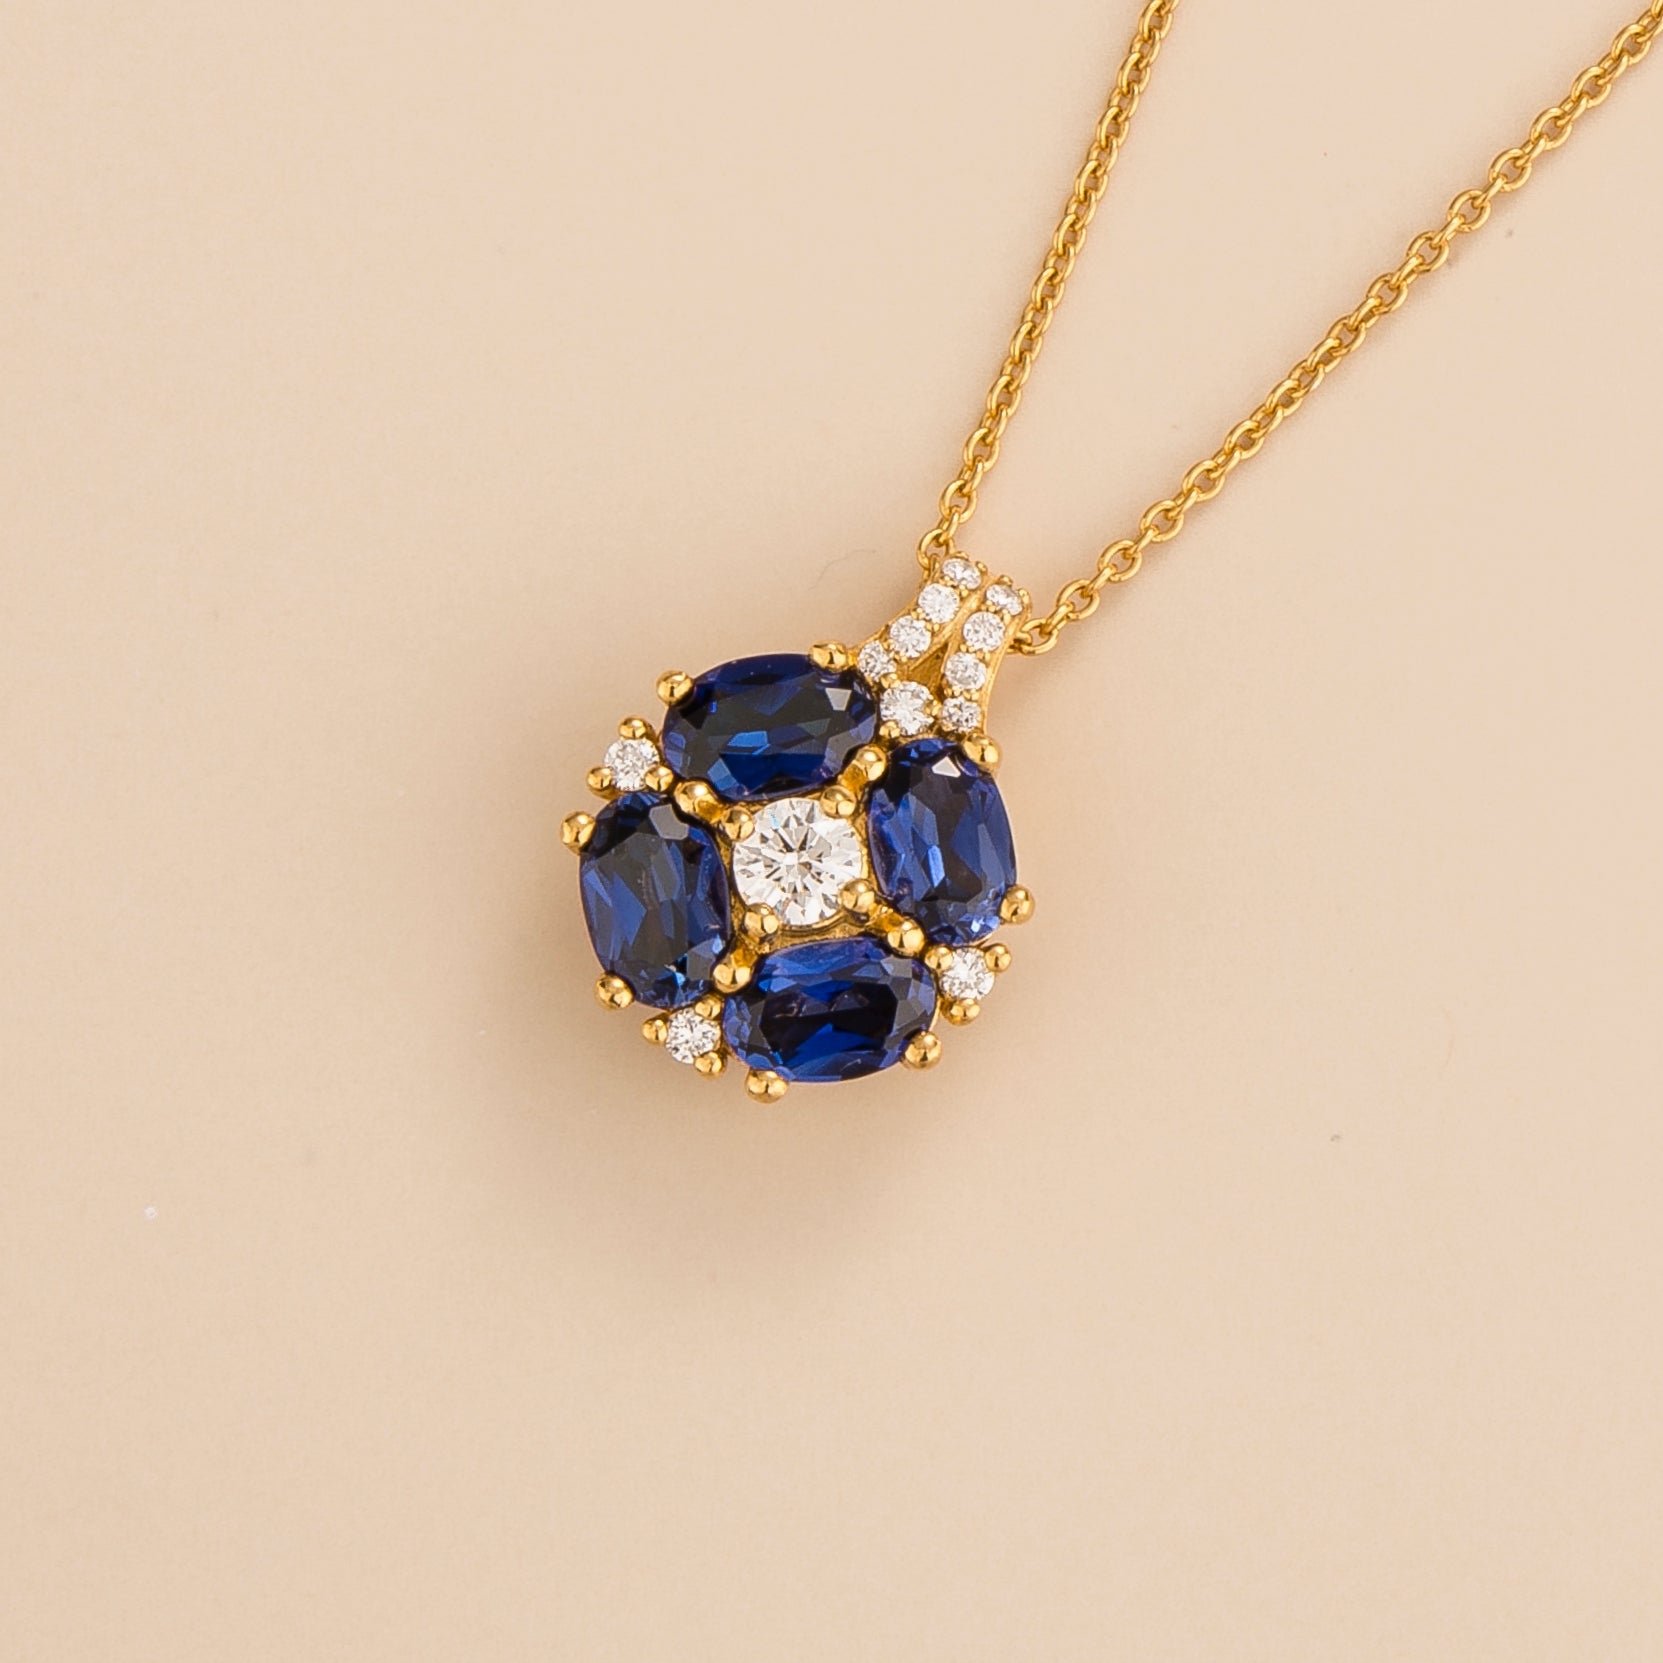 Pristi pendant necklace in 18K gold vermeil set with lab grown Diamonds and Blue sapphire gem stones. Perfect for yourself and as gift.